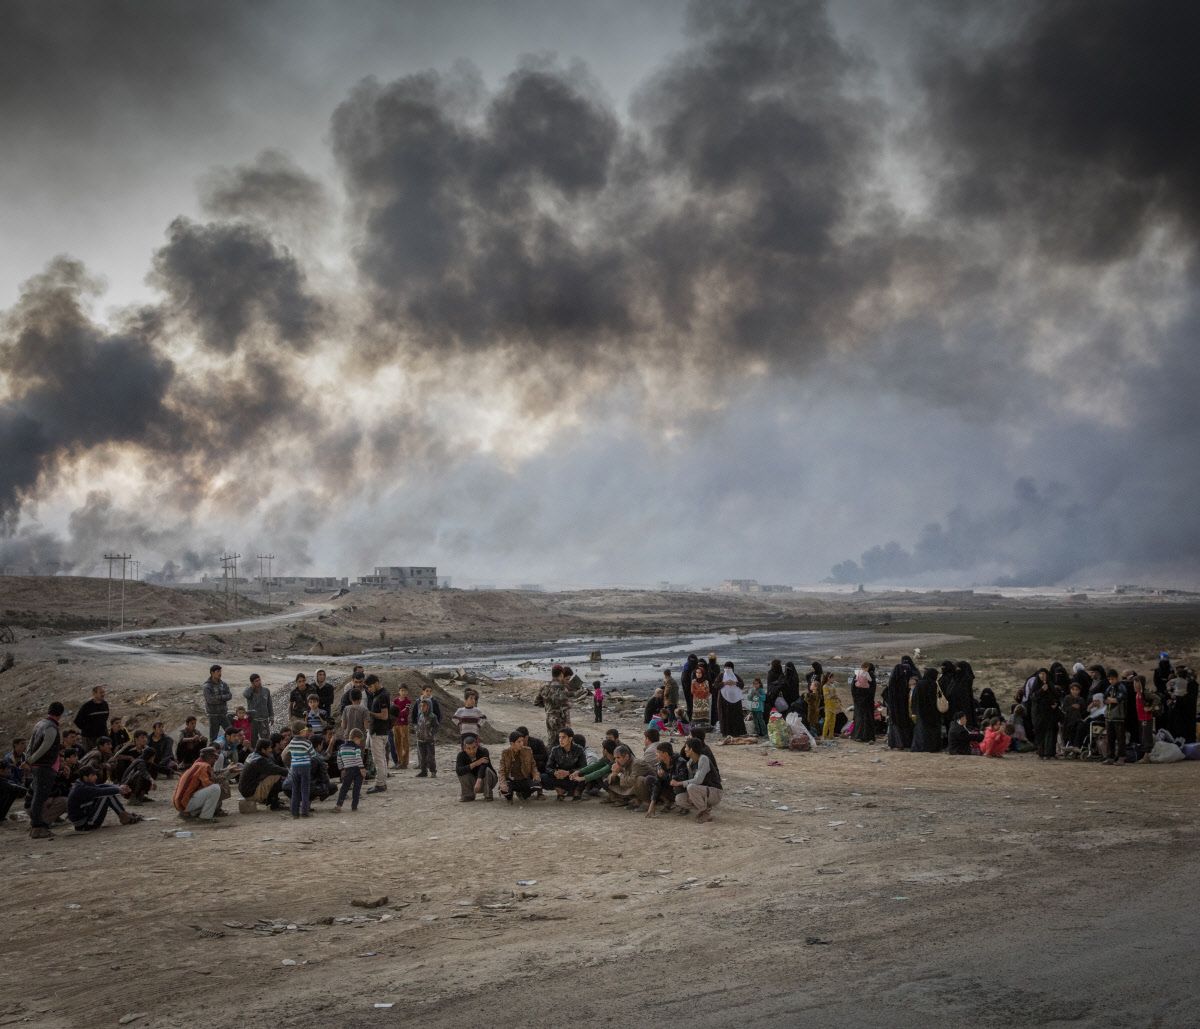 Internally displaced people fleeing from fighting in the village of Shora, 25km south of Mosul, reach an Iraqi army checkpoint on the Northern outskirts of Qayyarah. Image by Ivor Prickett/UNHCR/Panos. Iraq, 2018.